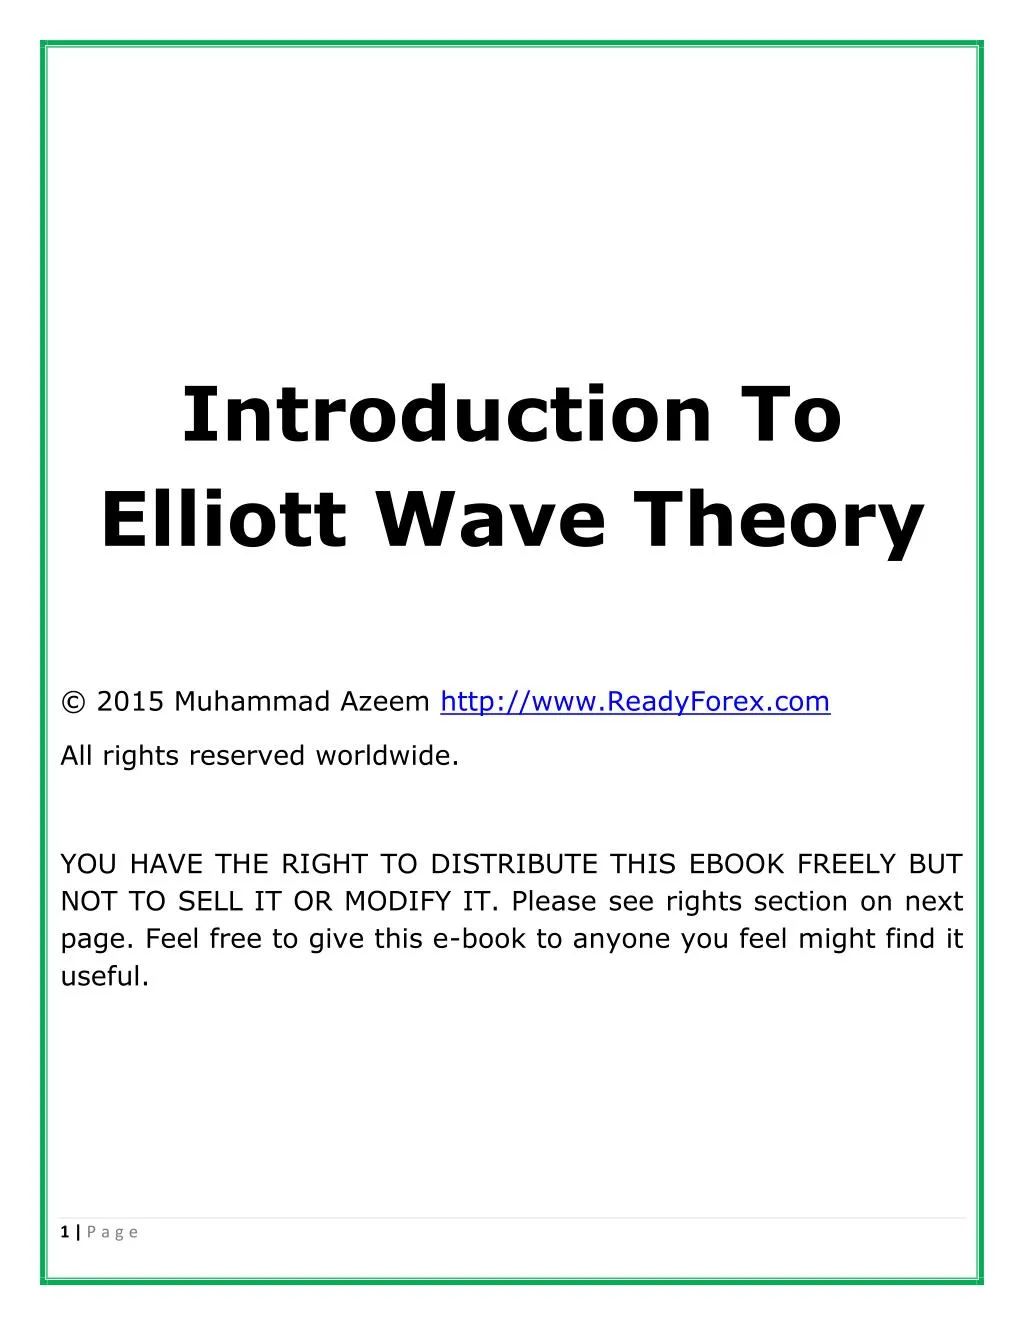 introduction to elliott wave theory